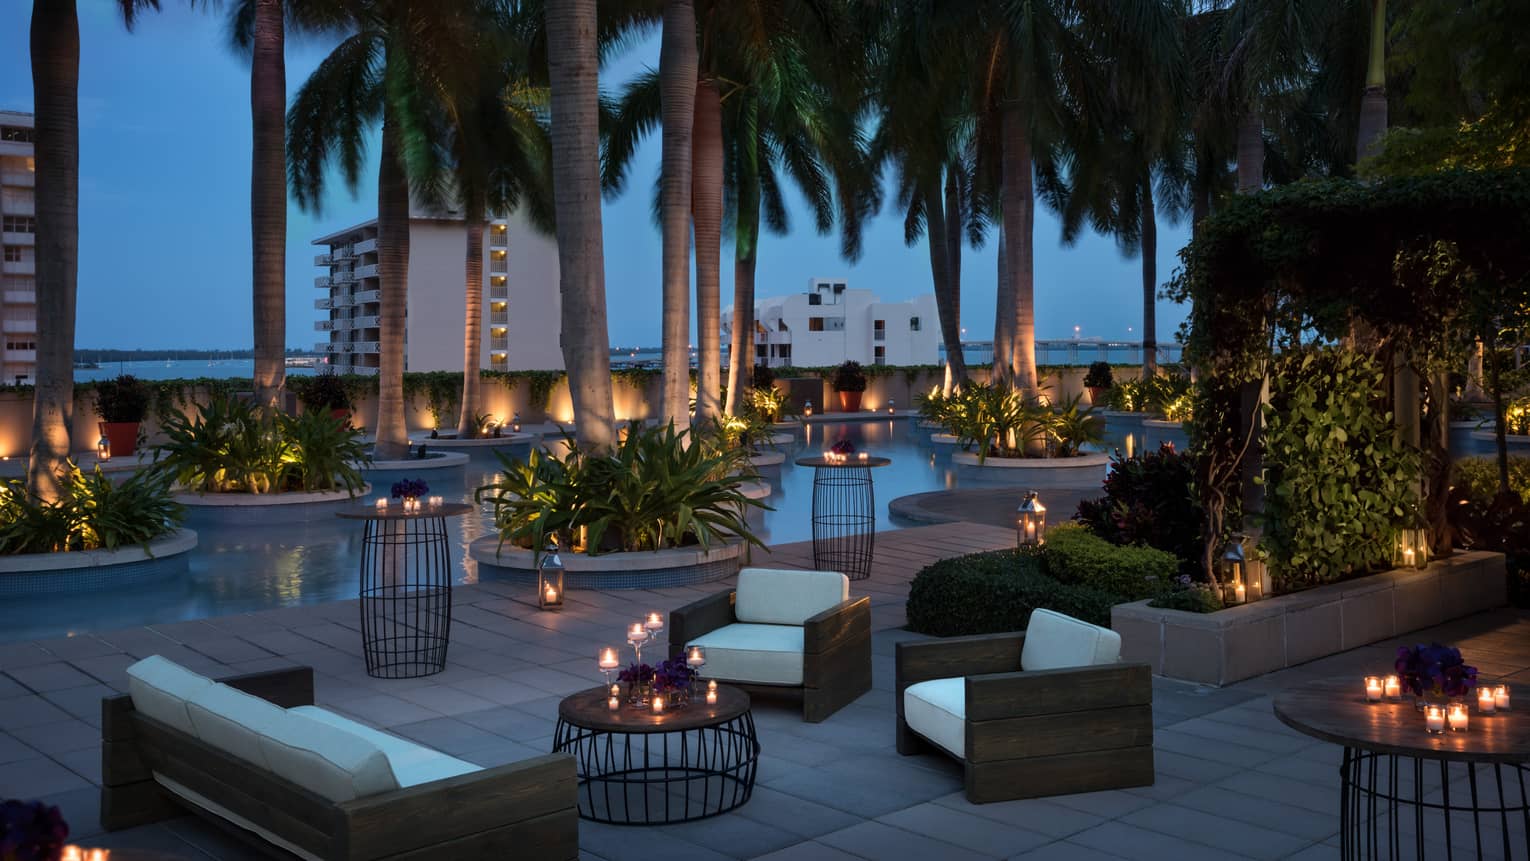 Plush white patio sofas and chairs, candle-lit tables under palm trees at night